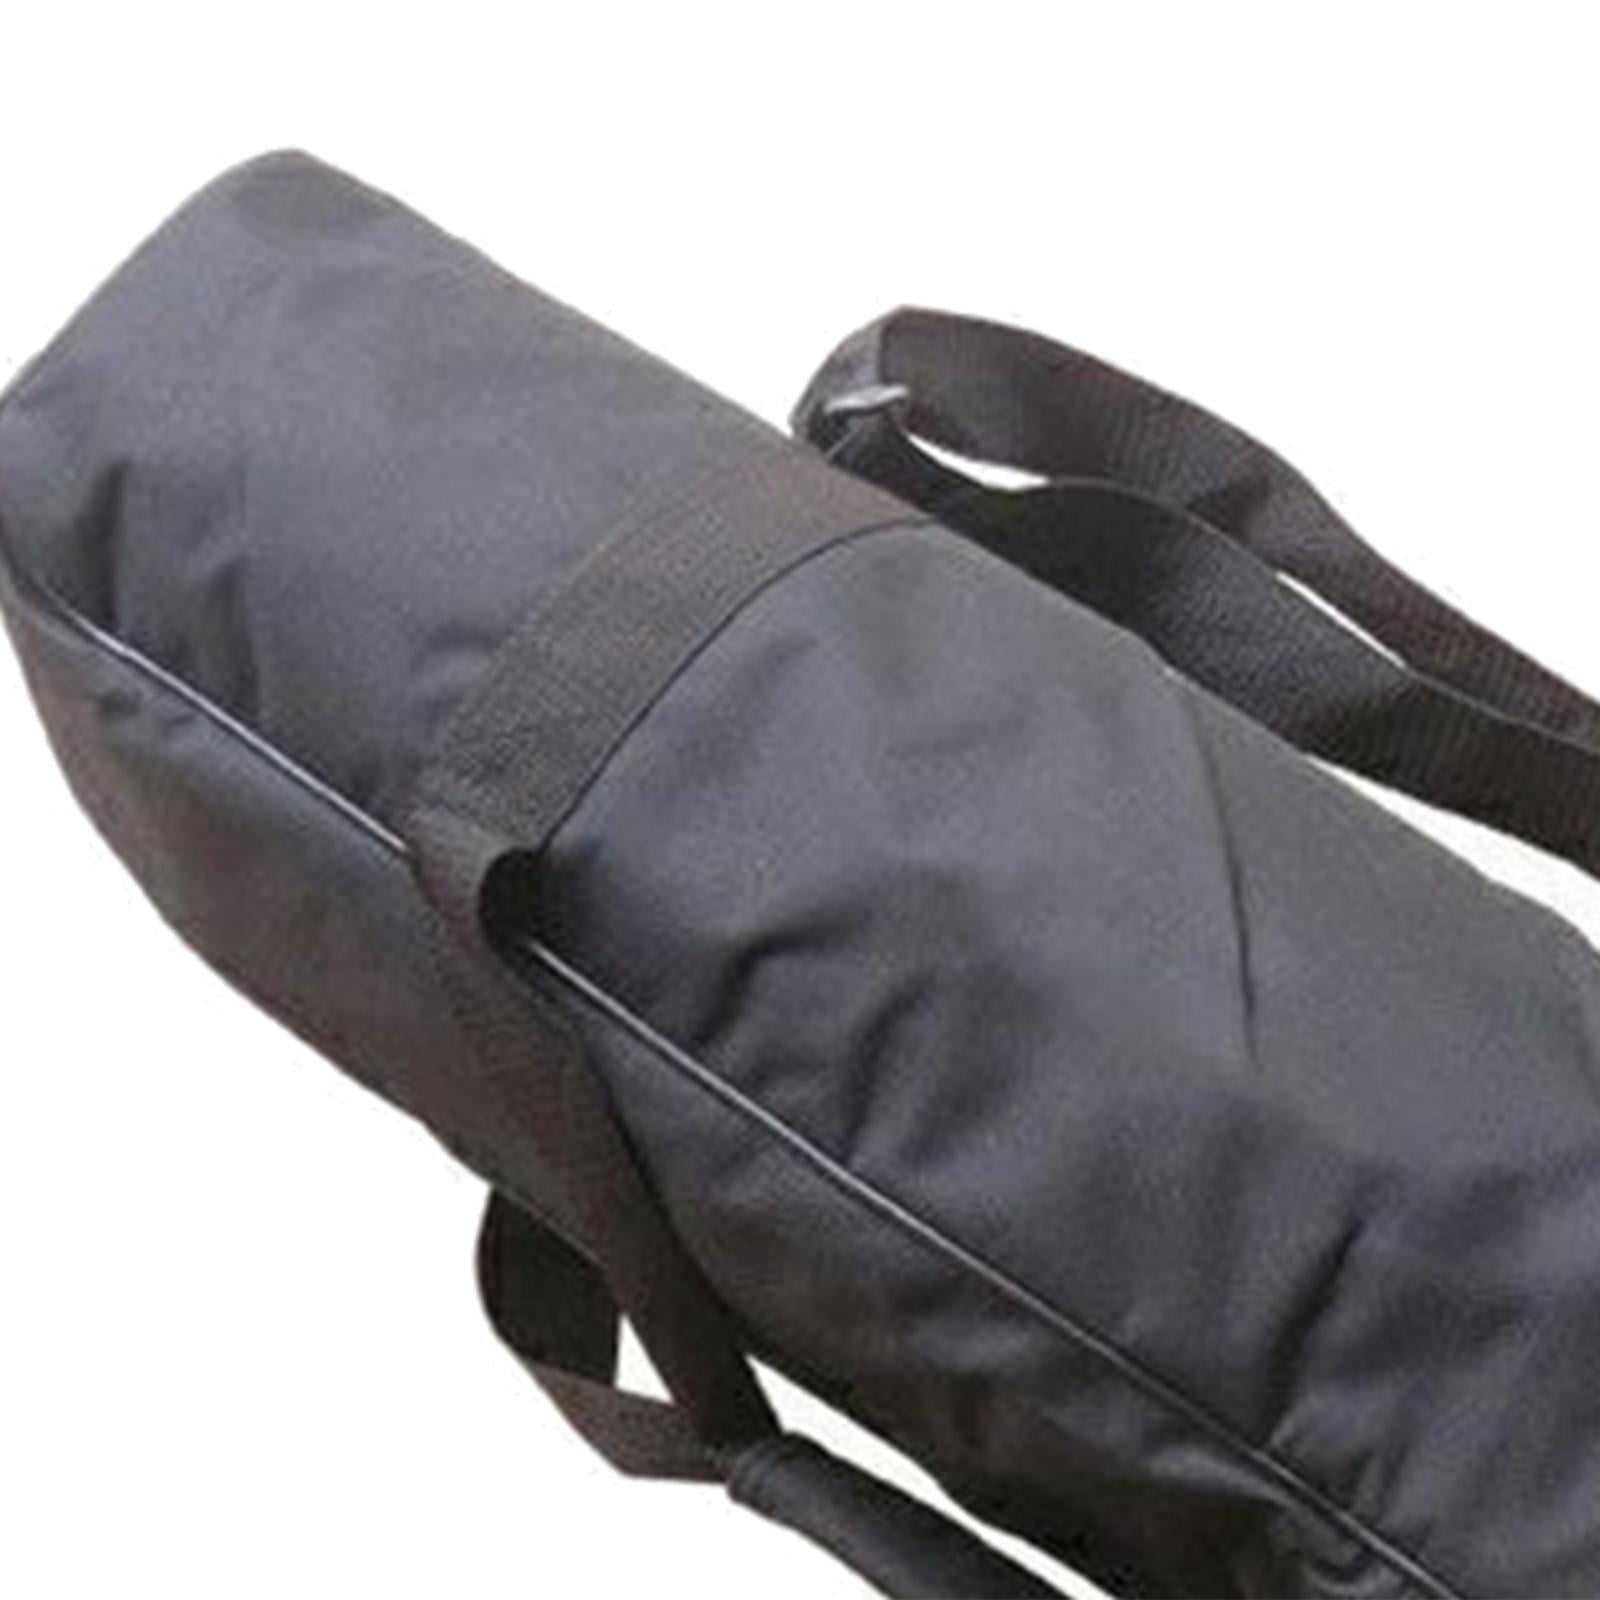 Padded Telescope Case Photography Equipment with Strap Shoulder